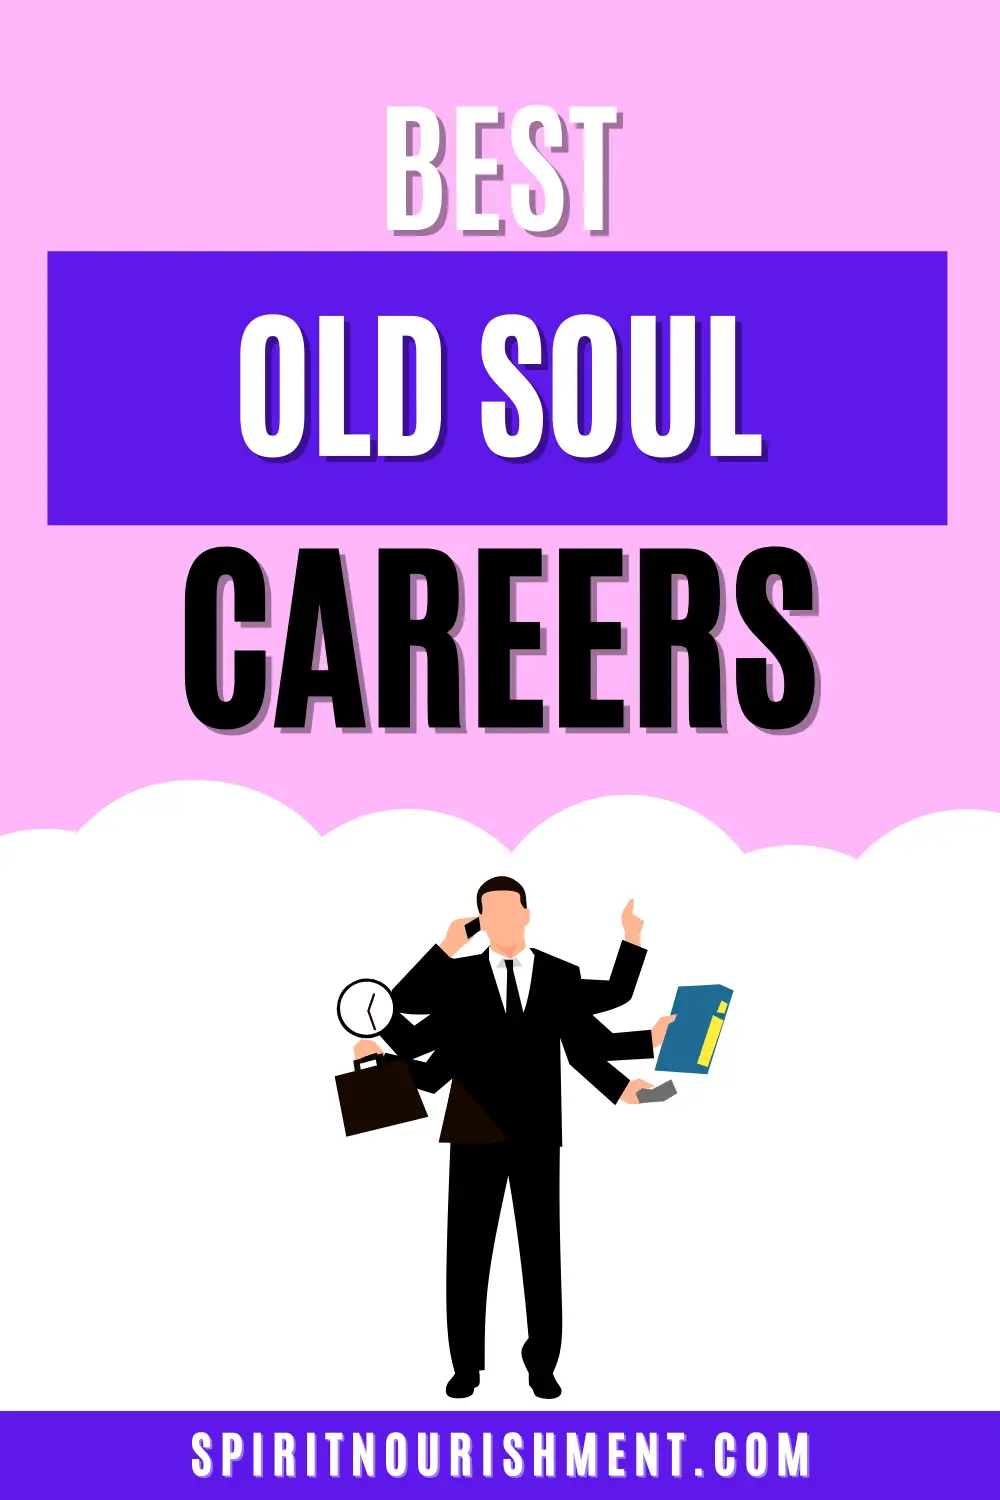 8 Best Careers For Old Souls For Fulfilment and Purpose